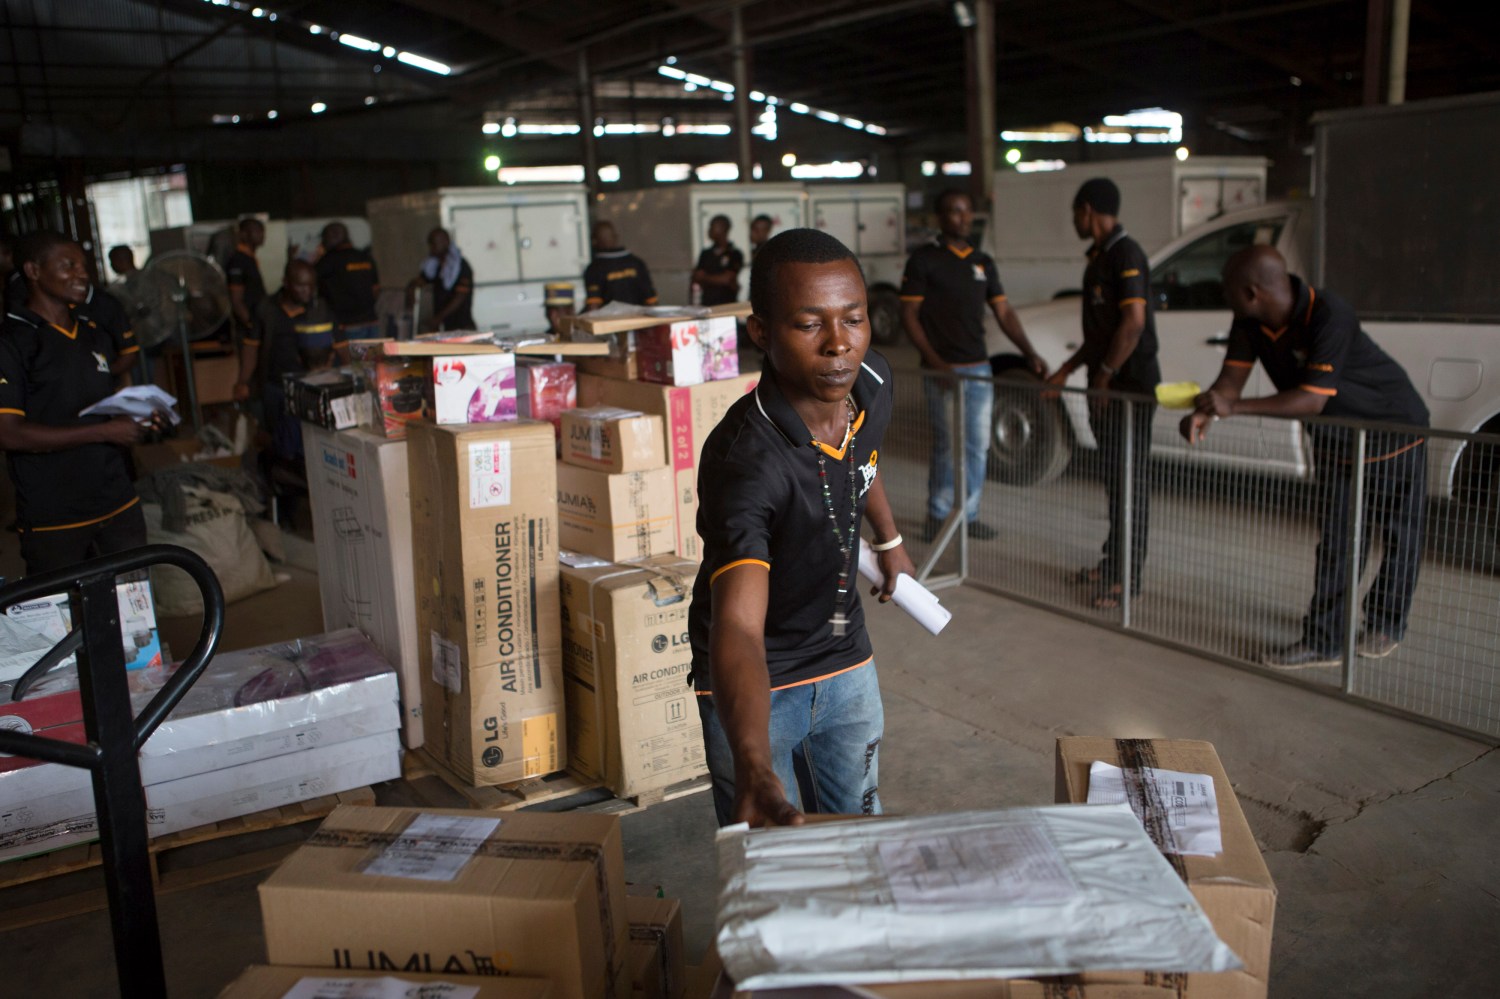 An employee of online retailer Jumia sorts packages for delivery at the company's warehouse in Lagos February 16, 2015. The growth of Africa's middle class has created demand for products that conventional retail struggles to satisfy due to a shortage of malls and grinding traffic in many cities that deters shoppers. The sector is still in its infancy. The internet's contribution to Africa's gross domestic product stood at 1.1 percent in 2013, much lower than other emerging markets. But this could rise to 10 percent, or $300 billion, by 2025, according to a report by consultants McKinsey's & Company. REUTERS/Joe Penney (NIGERIA - Tags: BUSINESS SOCIETY EMPLOYMENT)